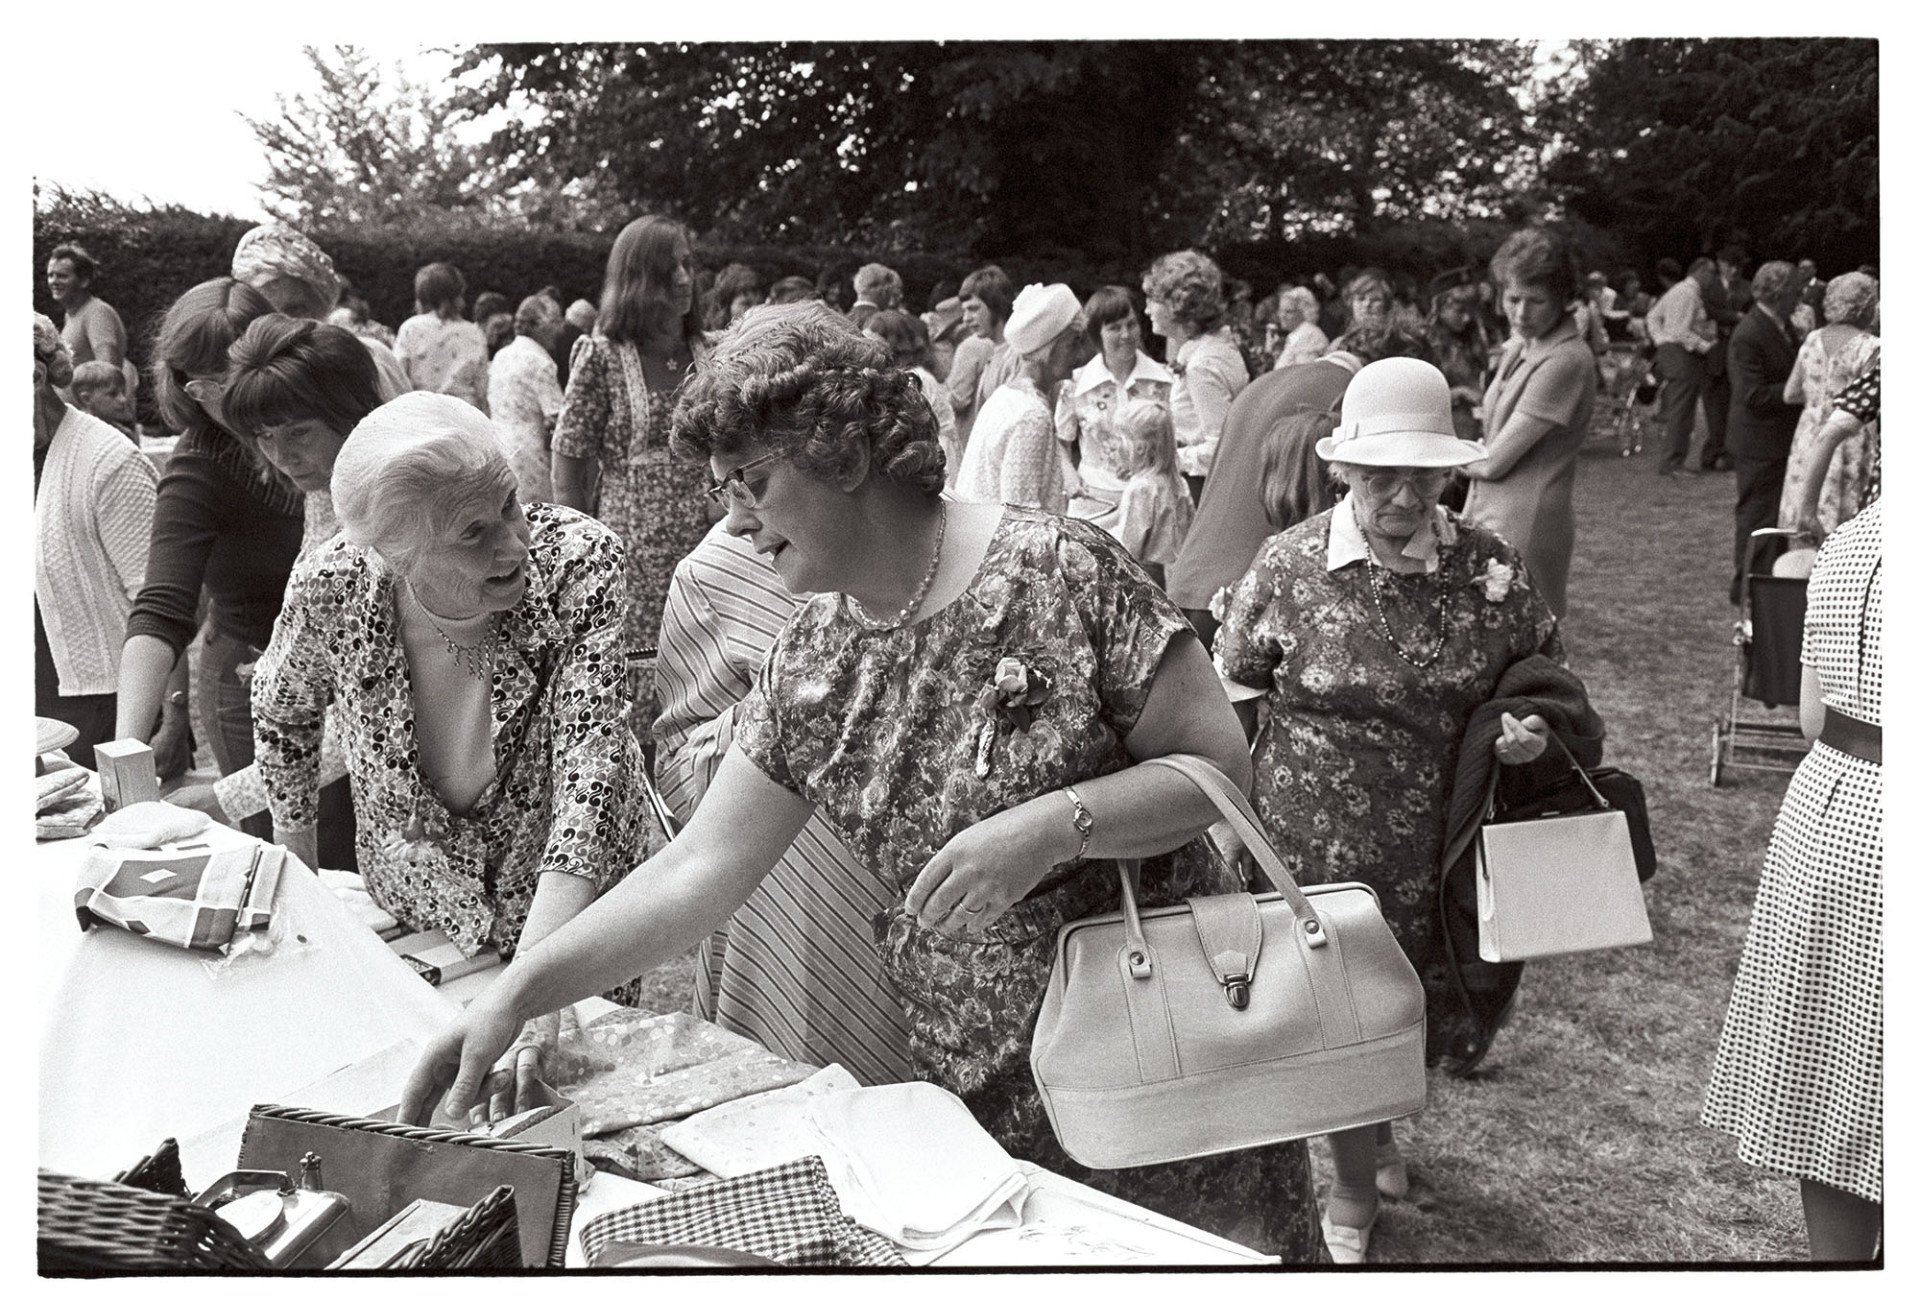 Church Garden Party, women at jumble stall.
[A woman examining items on a jumble stall at the Chulmleigh Church Garden Party in the grounds of Chulmleigh Vicarage.]